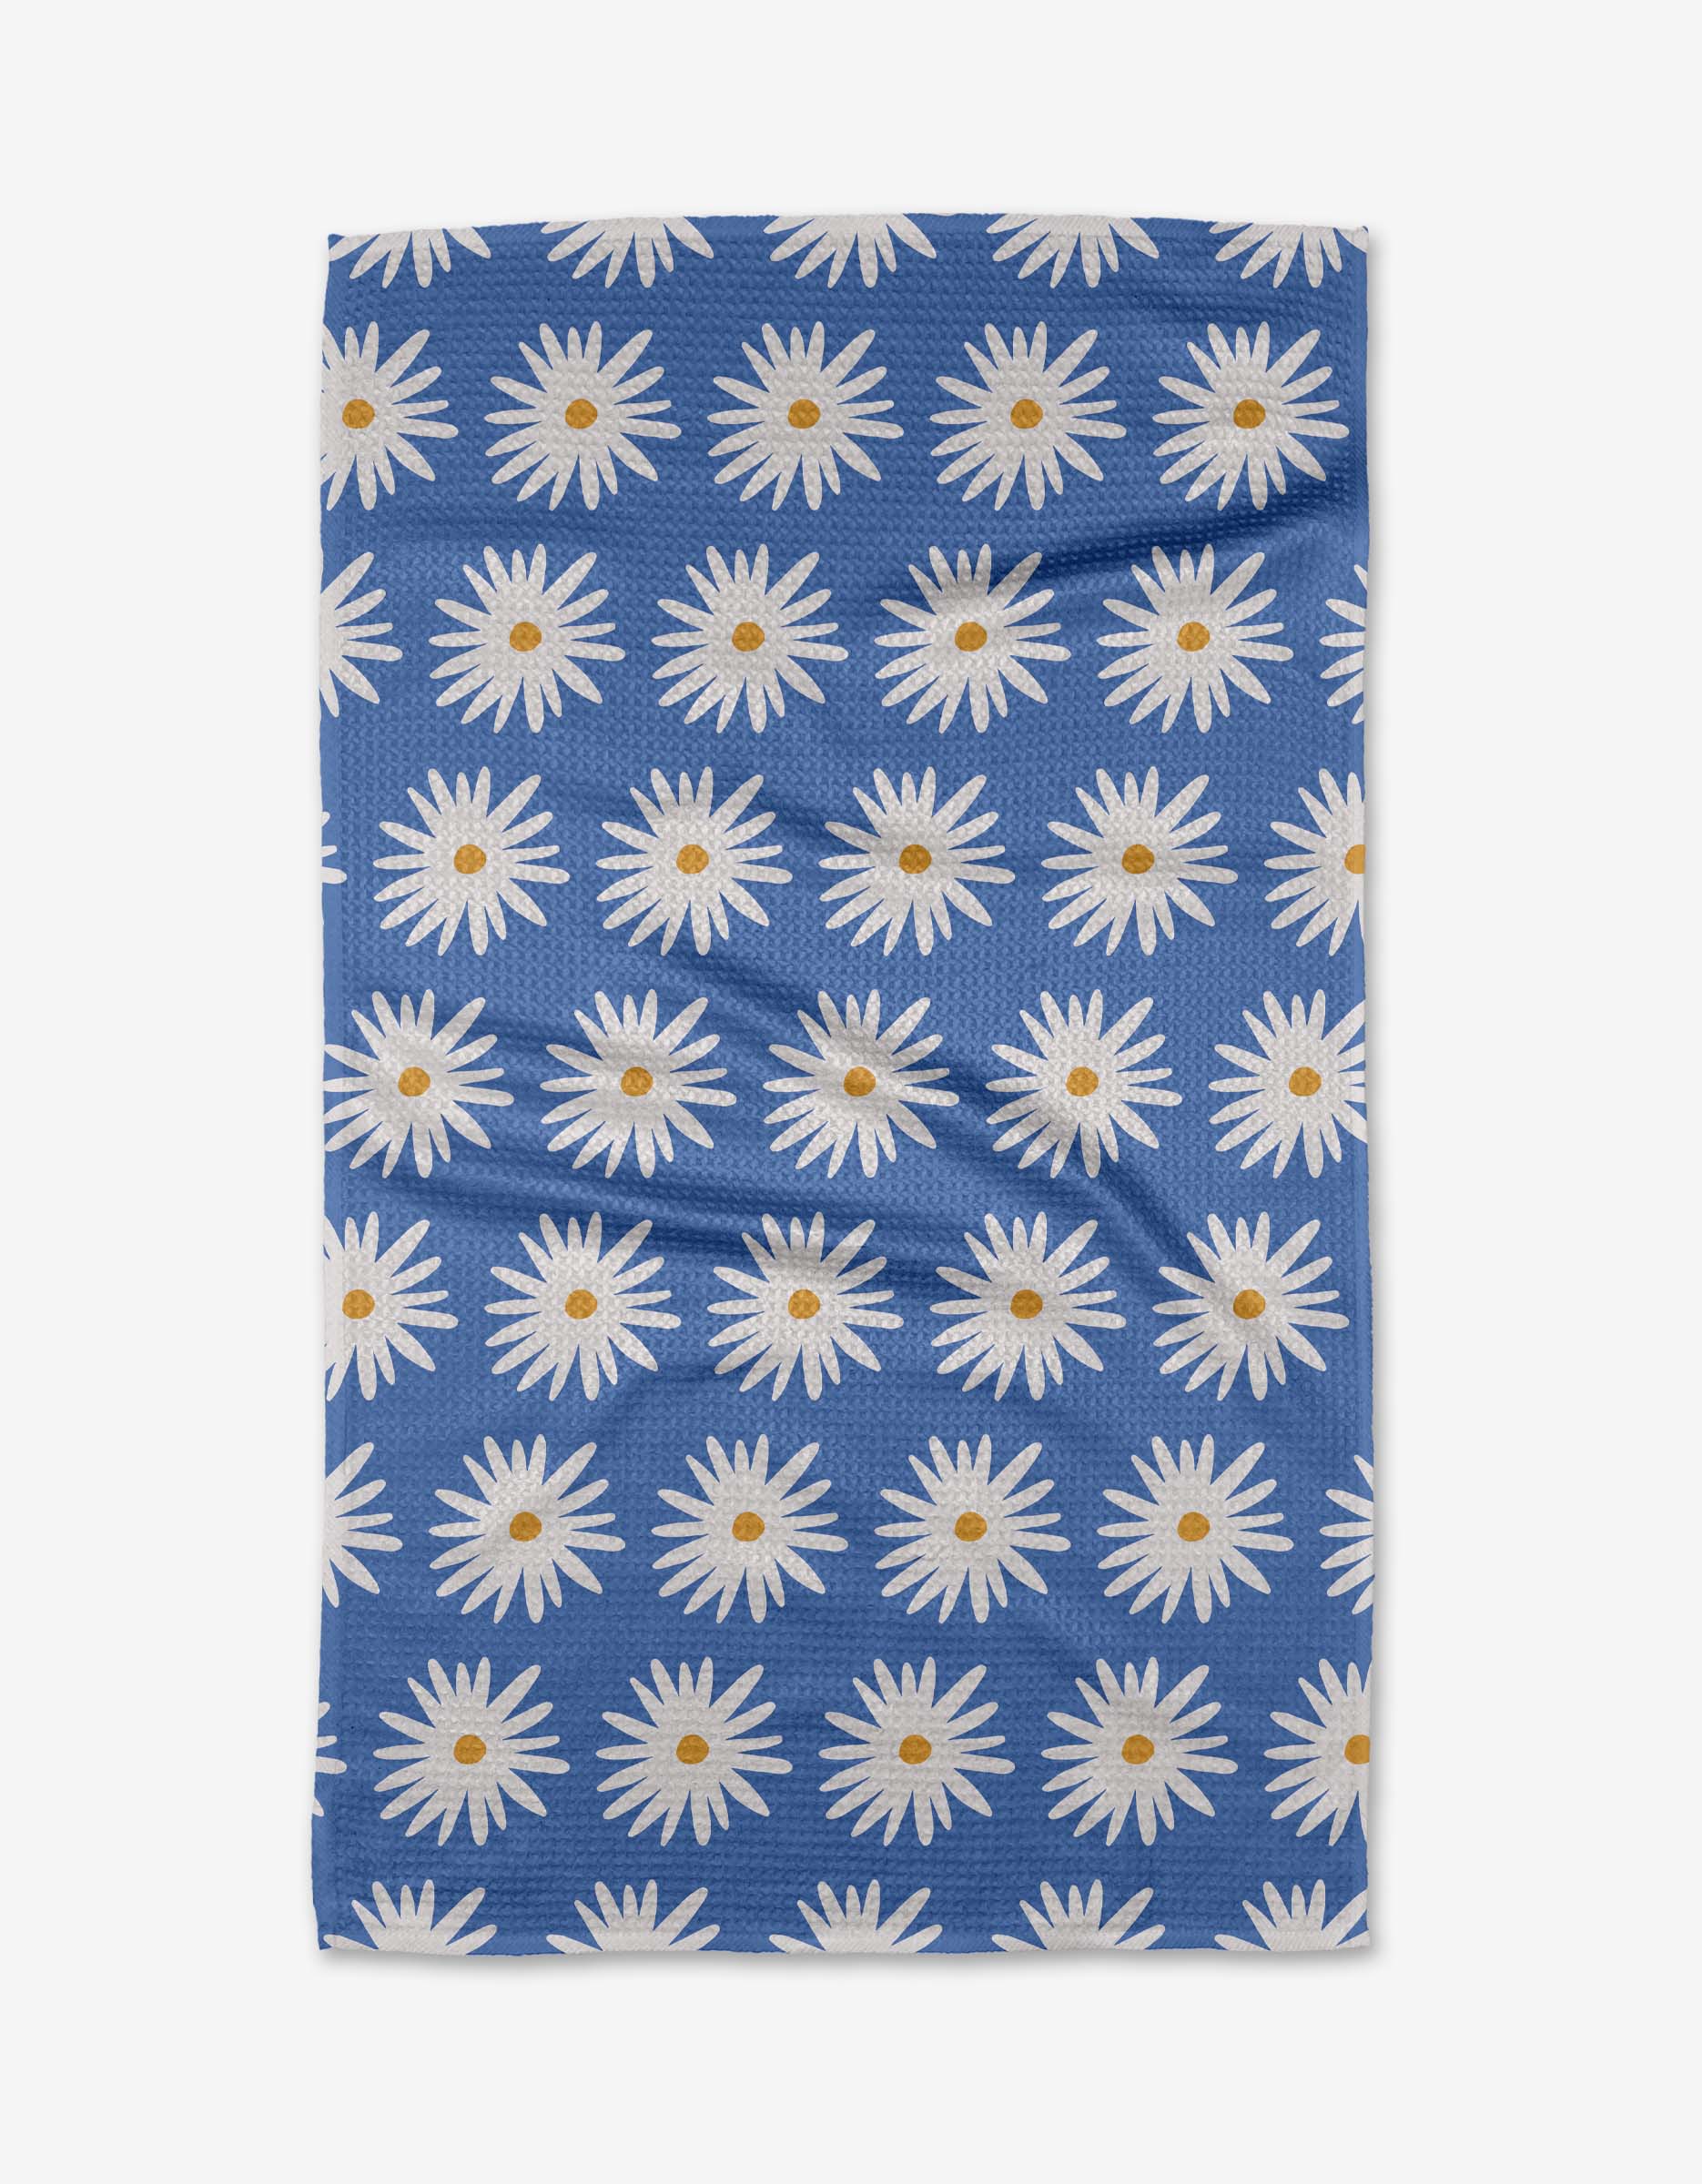 Blue Daisies Tea Towel by Geometry. Tea Towel has a white daisies on a blue background.